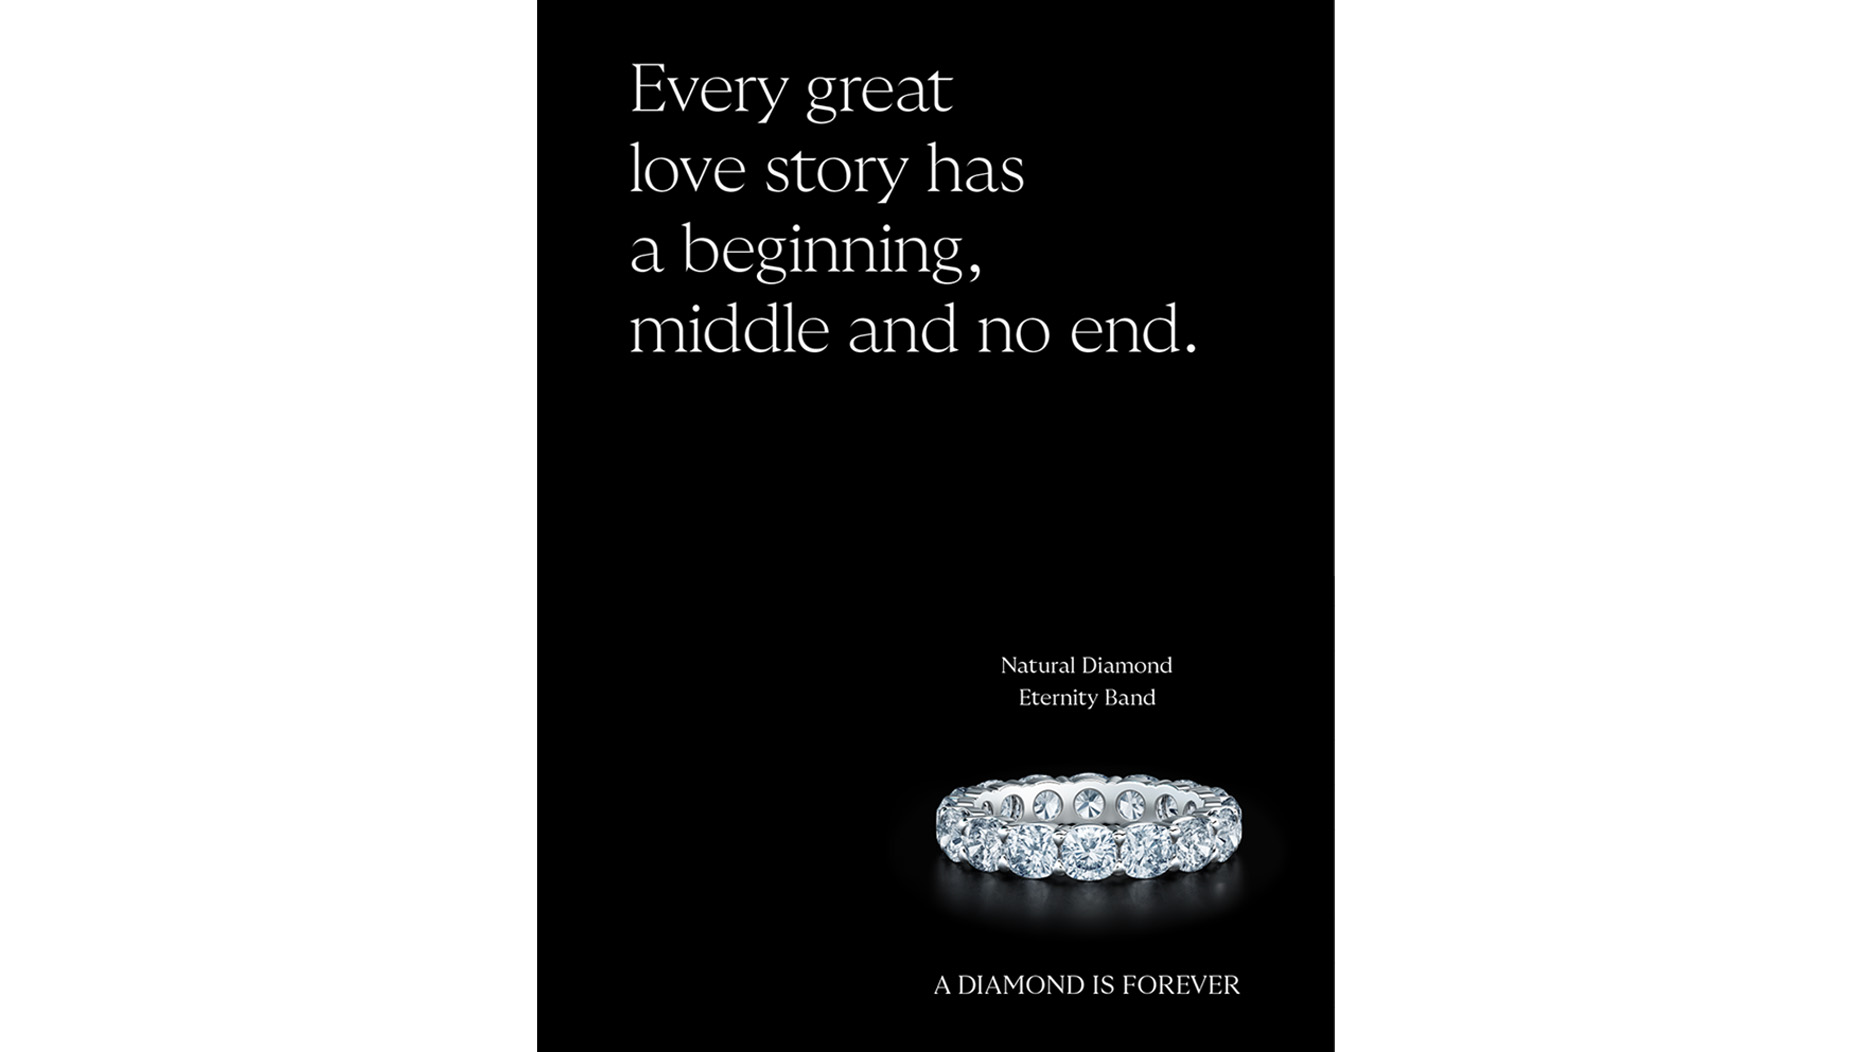 A diamond is forever: De Beers announces $US20 million campaign - Jeweller  Magazine: Jewellery News and Trends